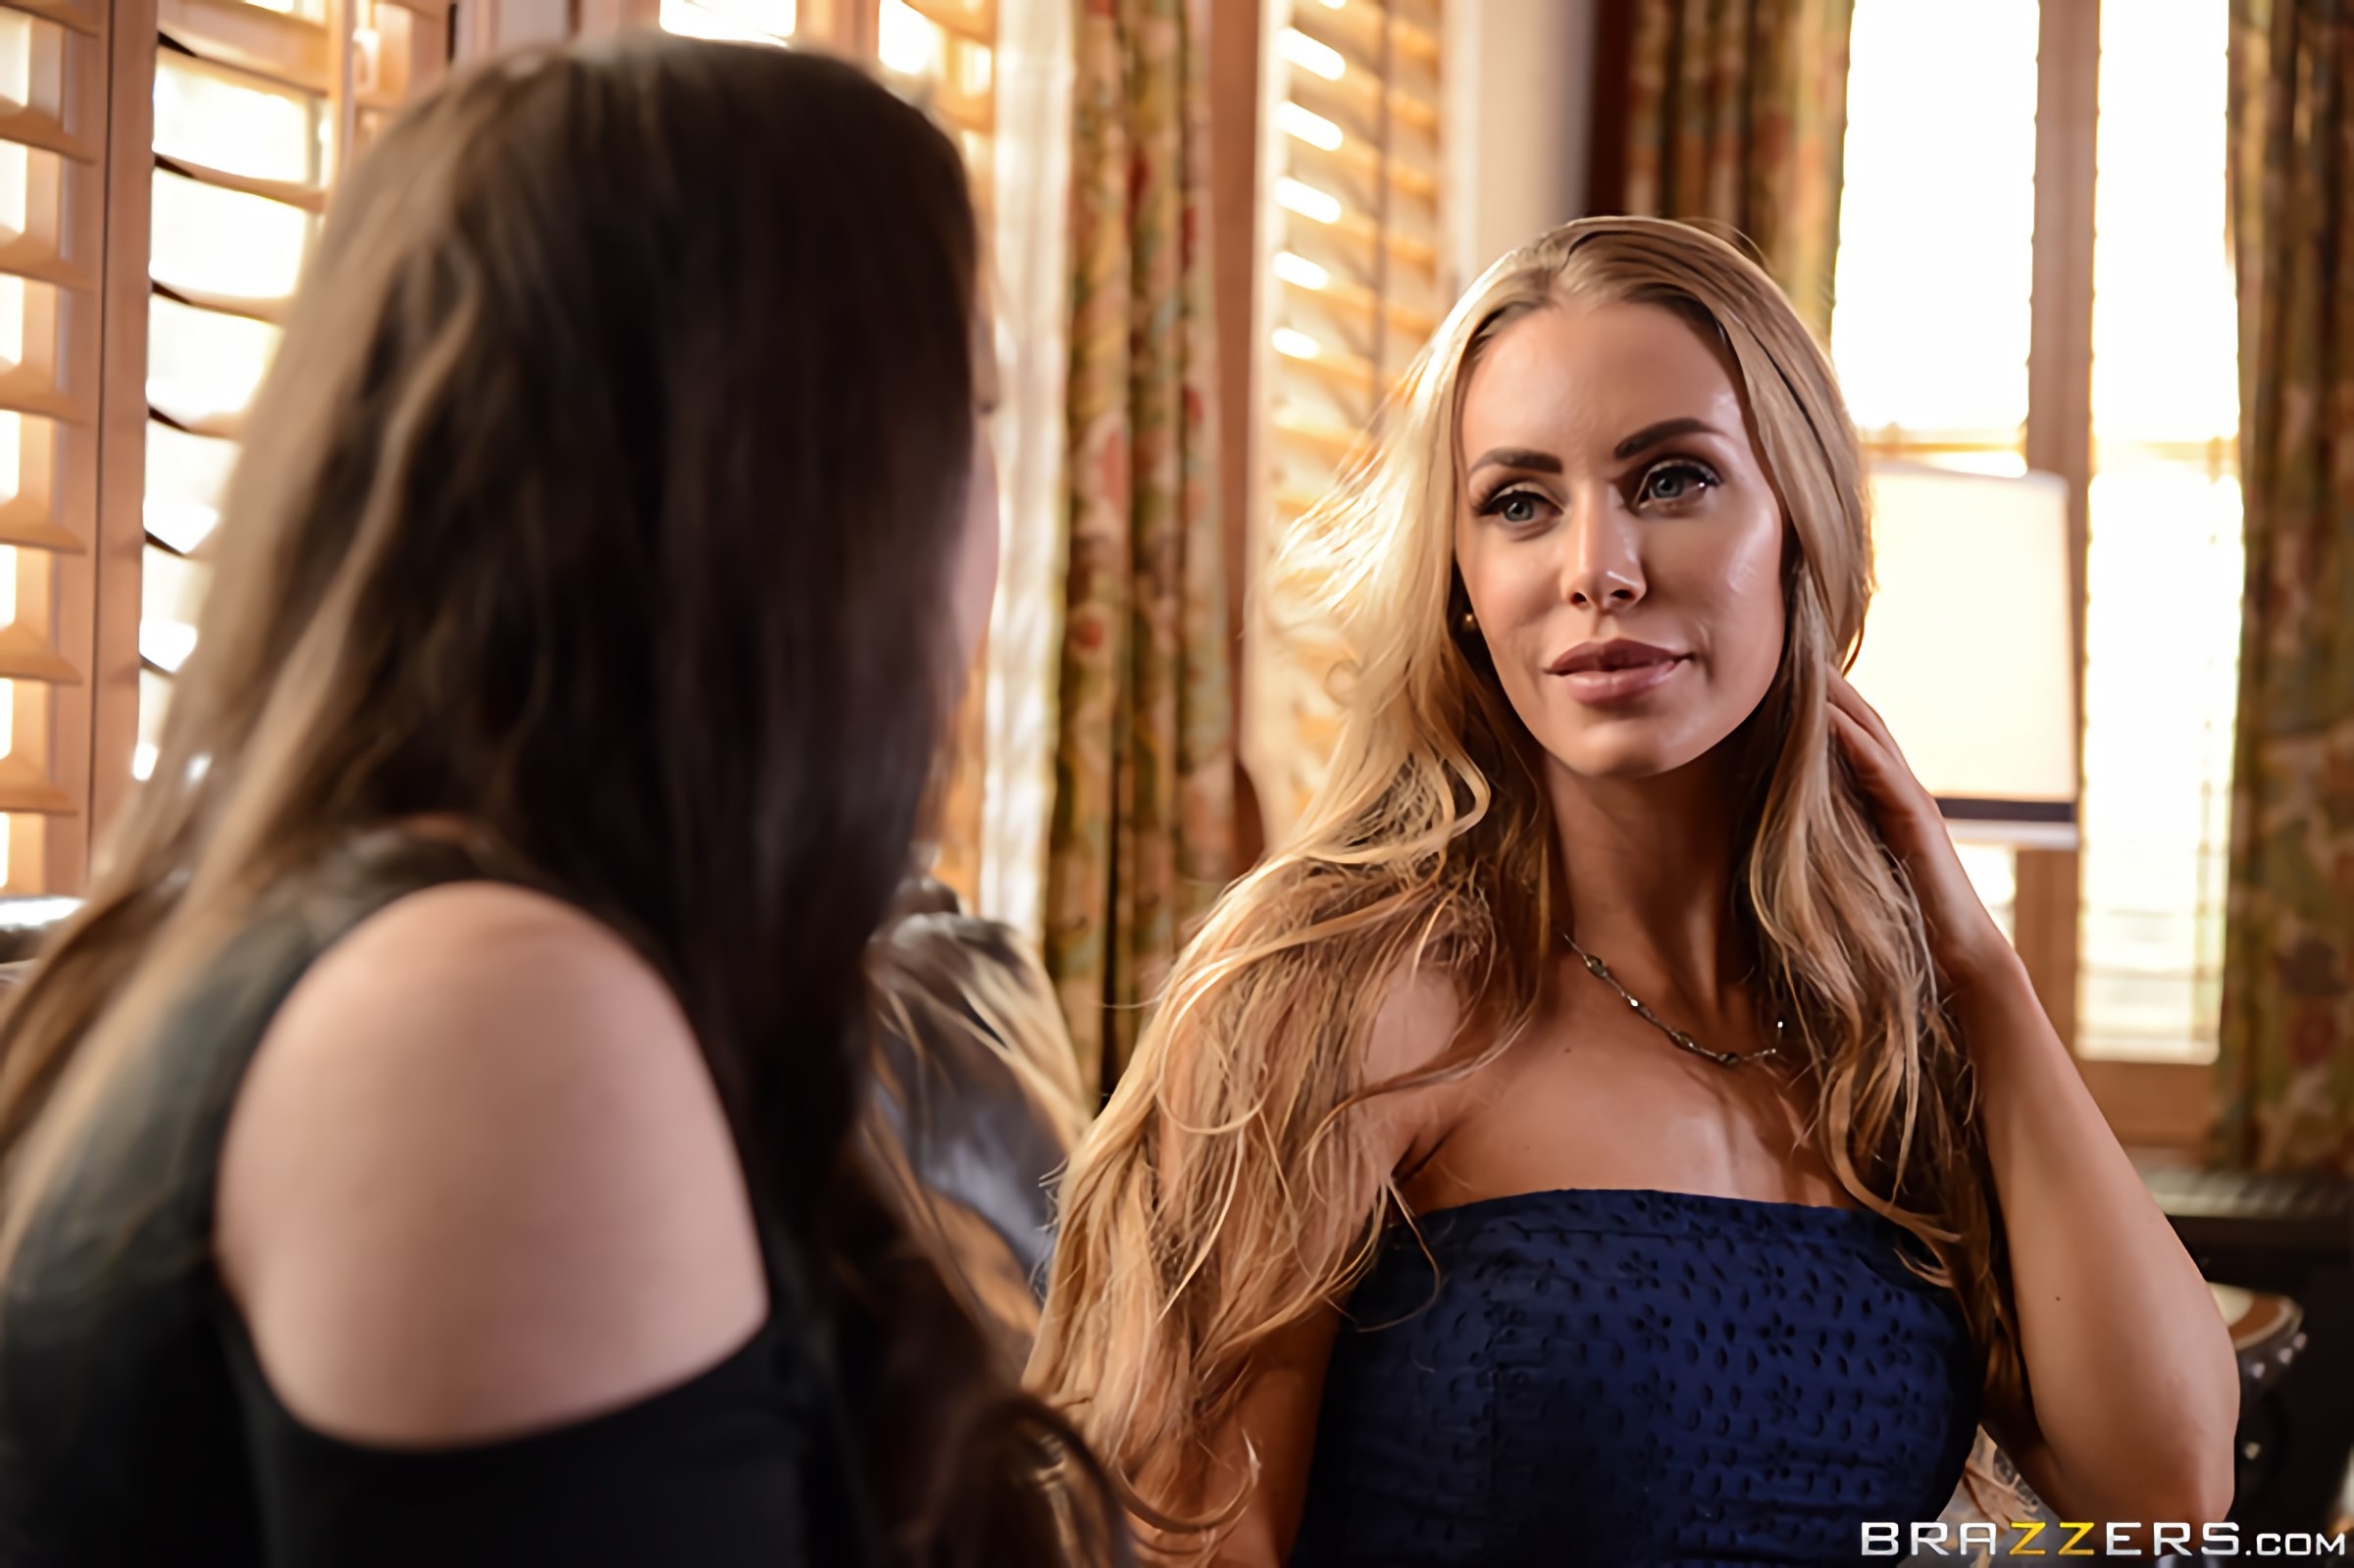 Brazzers 'Theres A Pornstar In My House' starring Nicole Aniston (Photo 10)